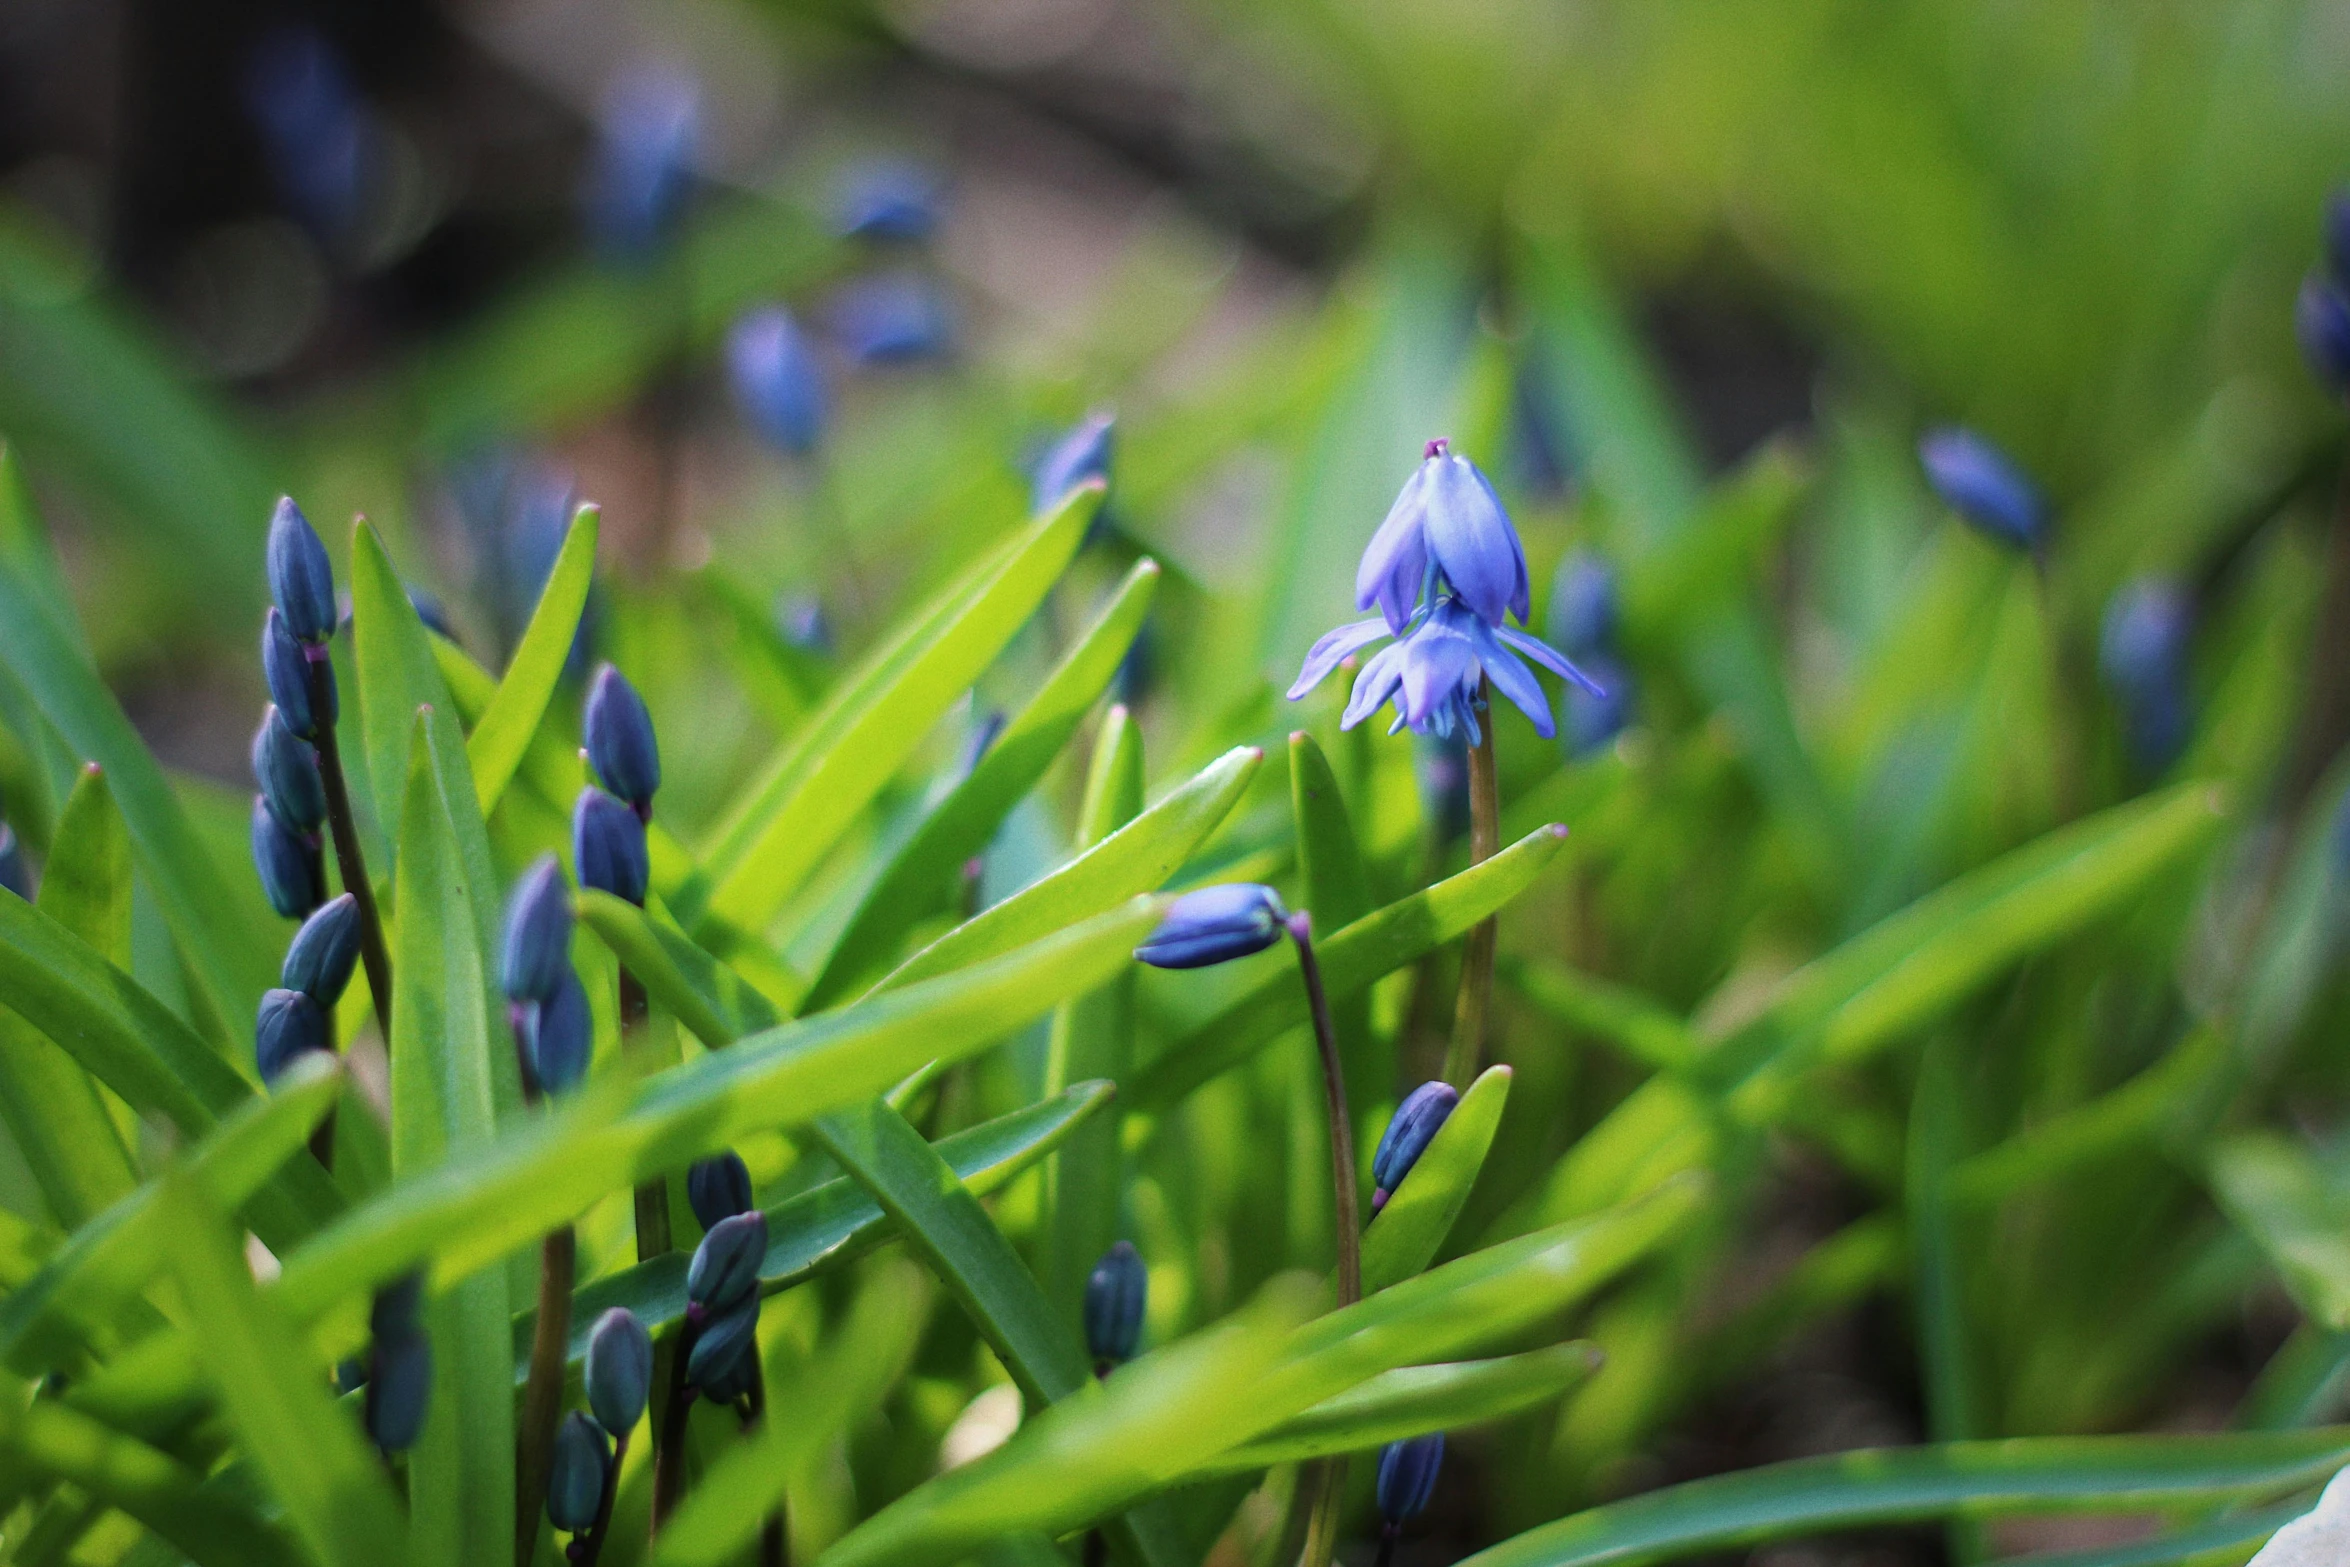 some pretty blue flowers growing in some green grass